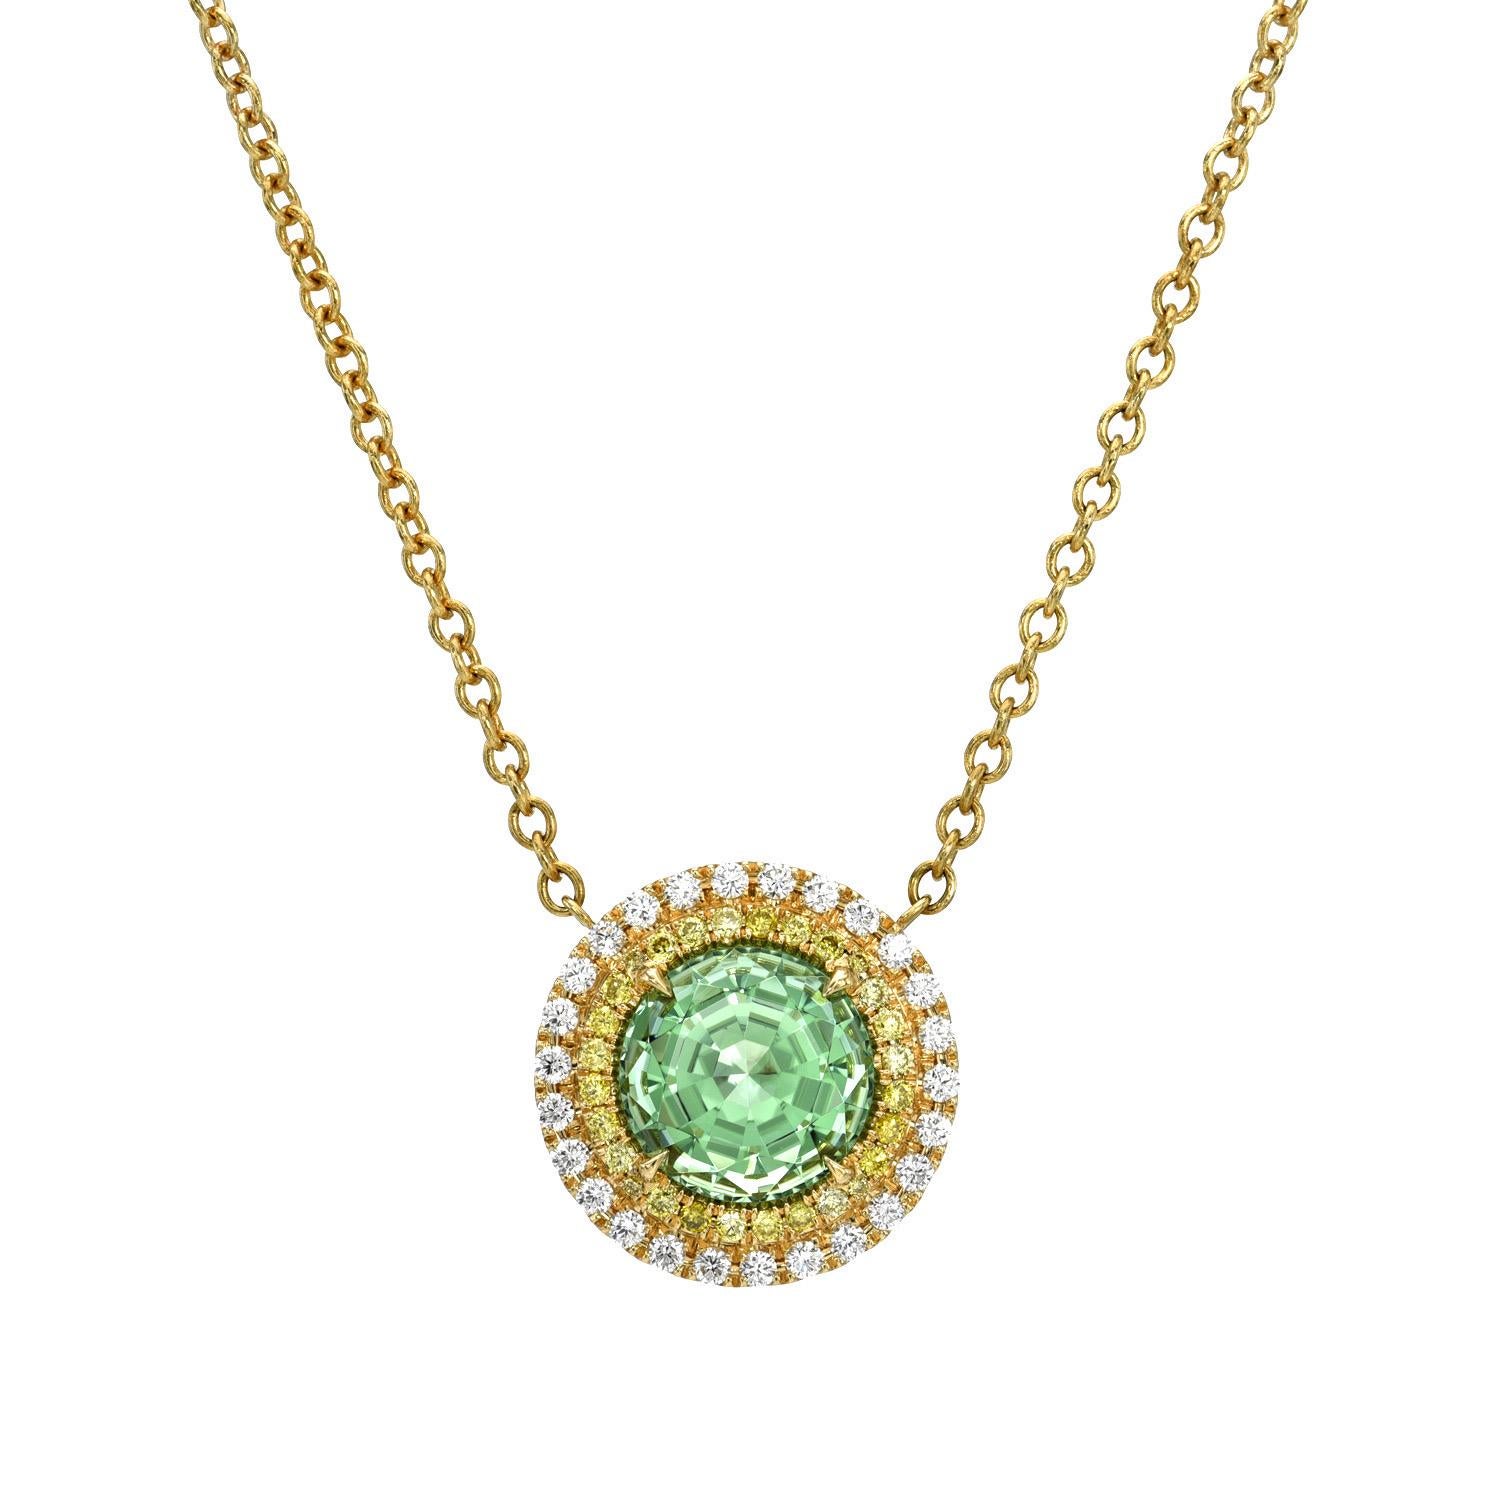 18K yellow gold necklace set with a 3.56 carat Mint Tourmaline round, decorated with a double halo set with a total of 0.20 carat fancy intense yellow diamonds, VS-SI, and a total of 0.30 carat F-G/VS round brilliant diamonds.

Returns are accepted